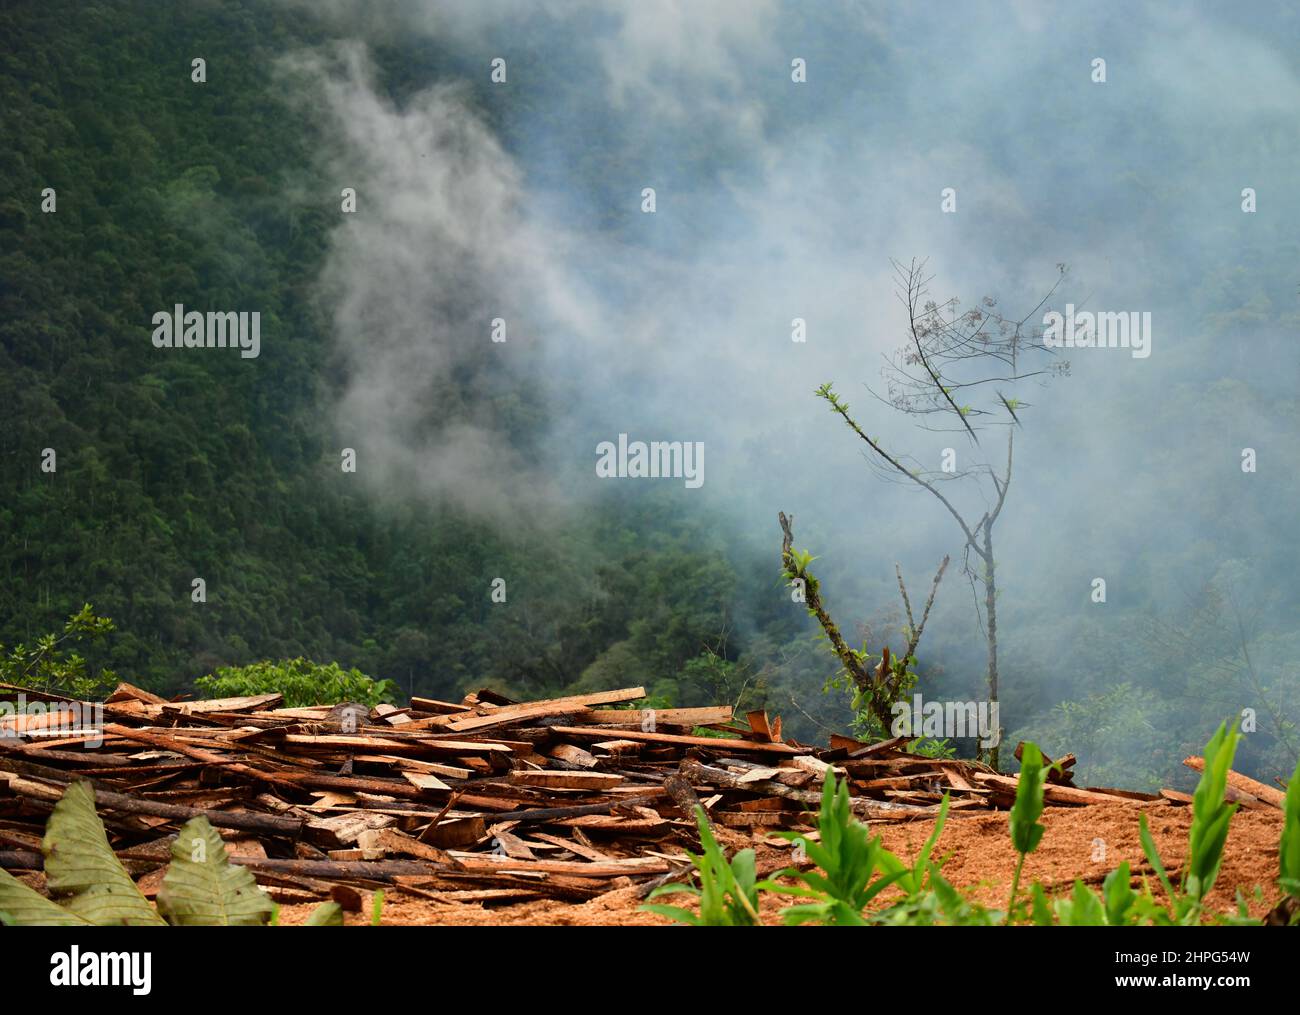 A logging site in the rainforest. Mature hardwood trees have been felled and are burning. Colombia, South America Stock Photo